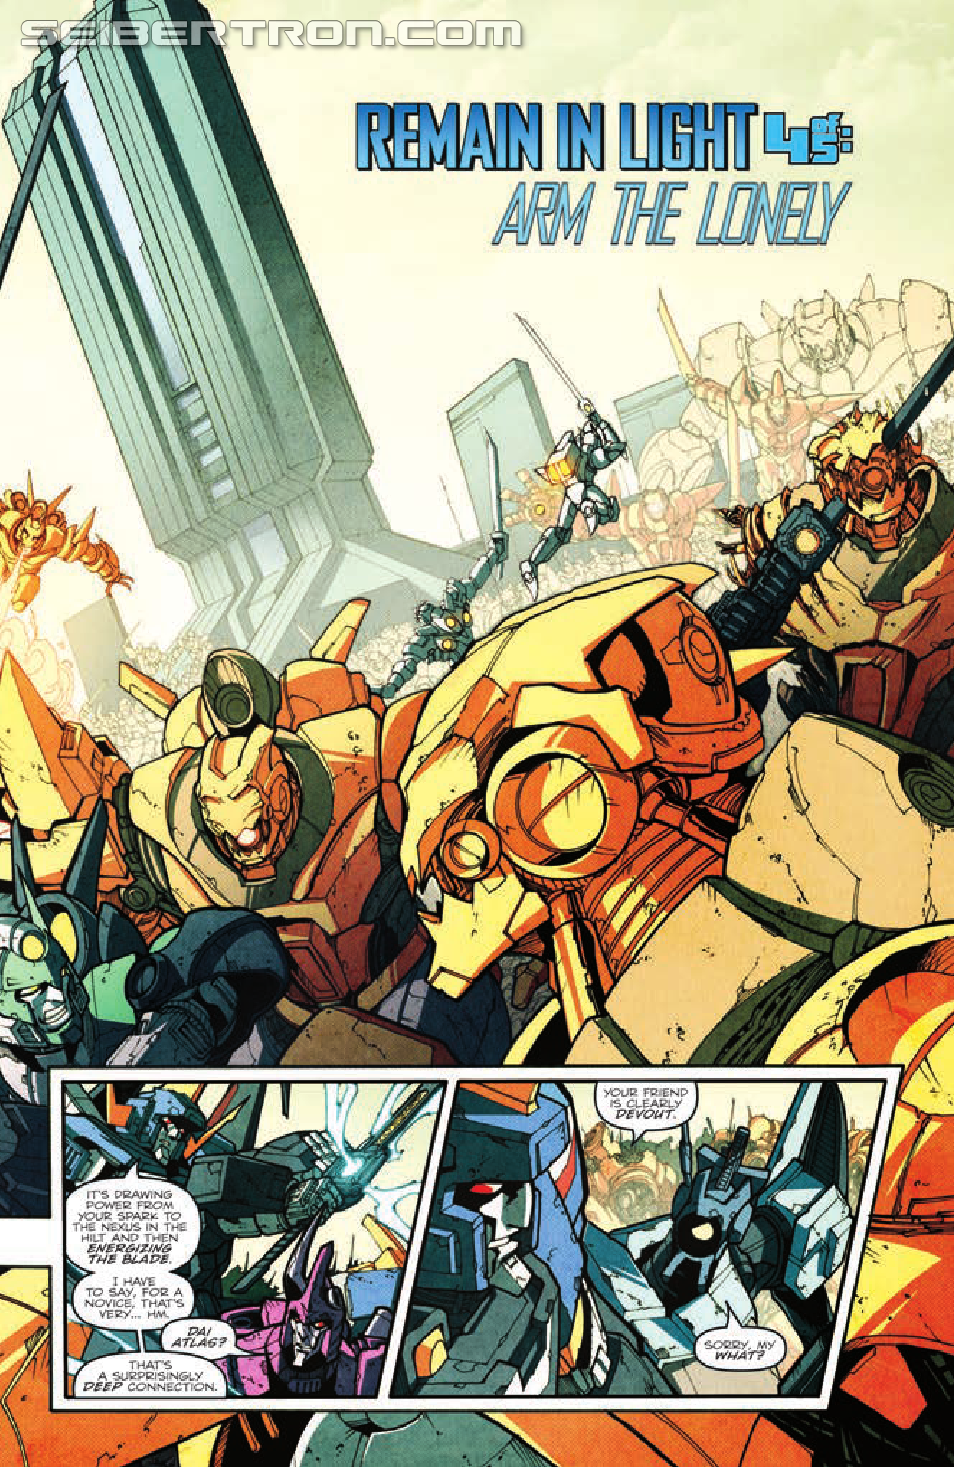 Transformers: More Than Meets The Eye Ongoing #20 Preview